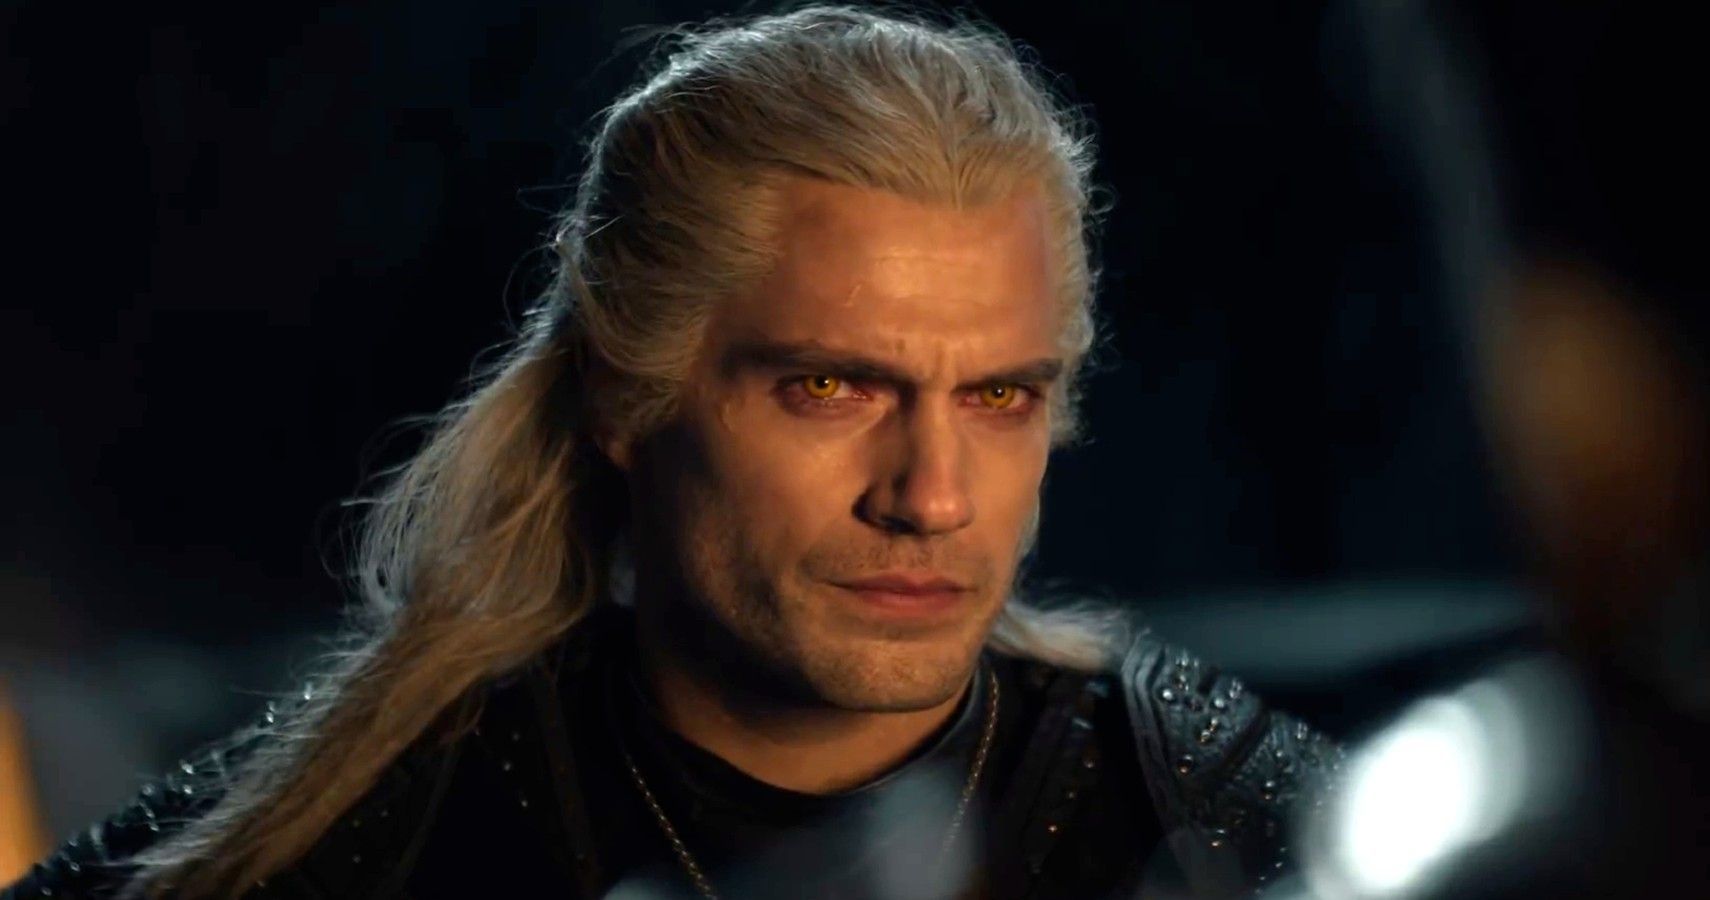 The Witcher Geralt Mannerisms From The Game Henry Cavill Nails